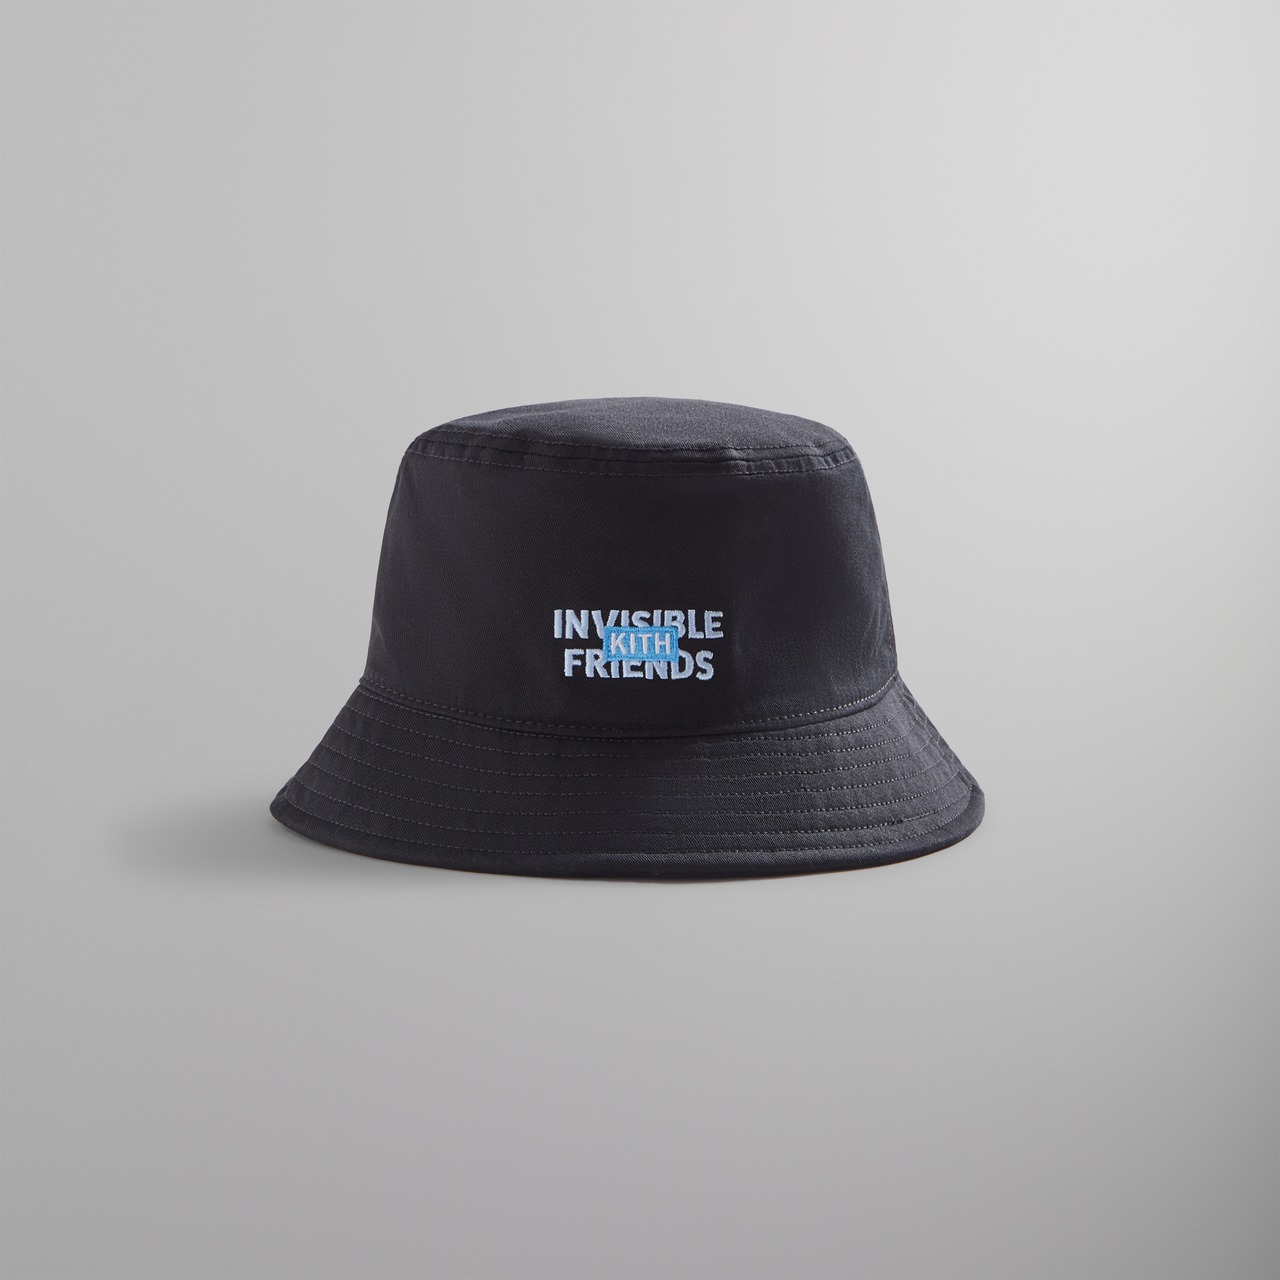 KITH x invisible friends Black Bucket Hat